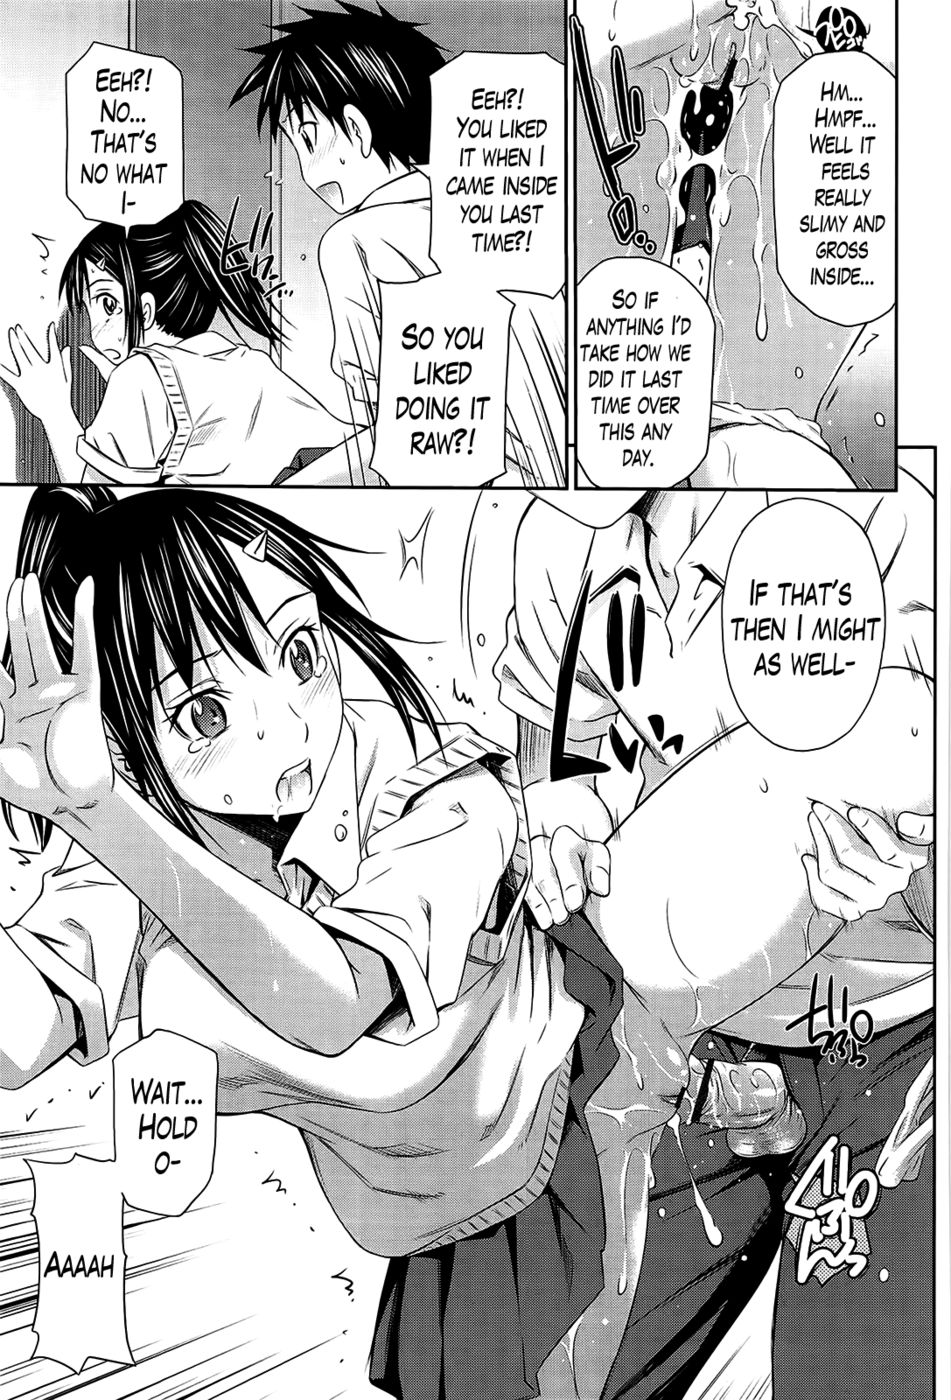 Hentai Manga Comic-A Very Hot Middle-Chapter 5-Substitute GirlFriend-19